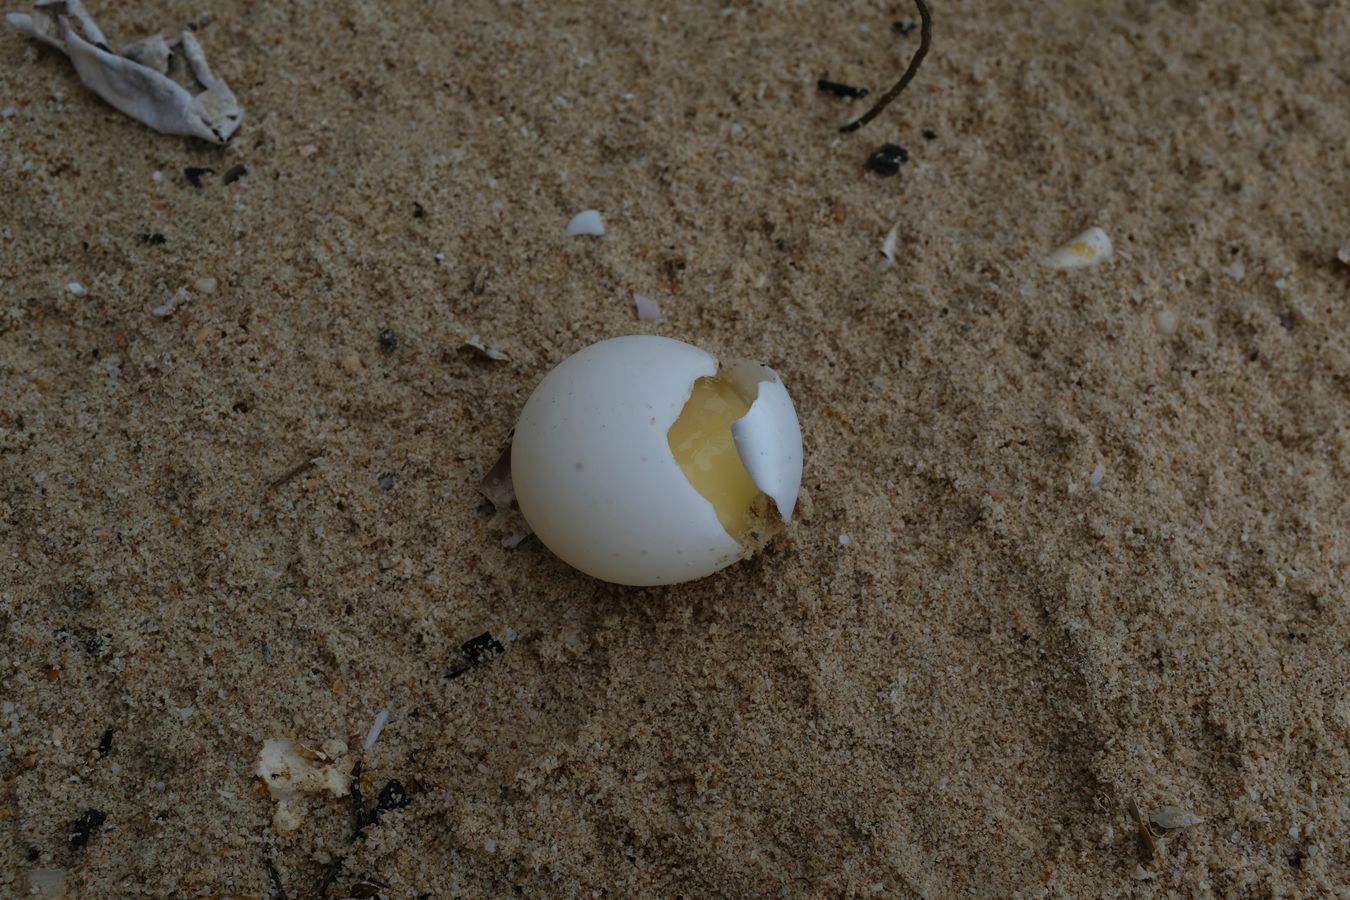 Green turtle egg of approximately 2 weeks of incubation broken on the beach.